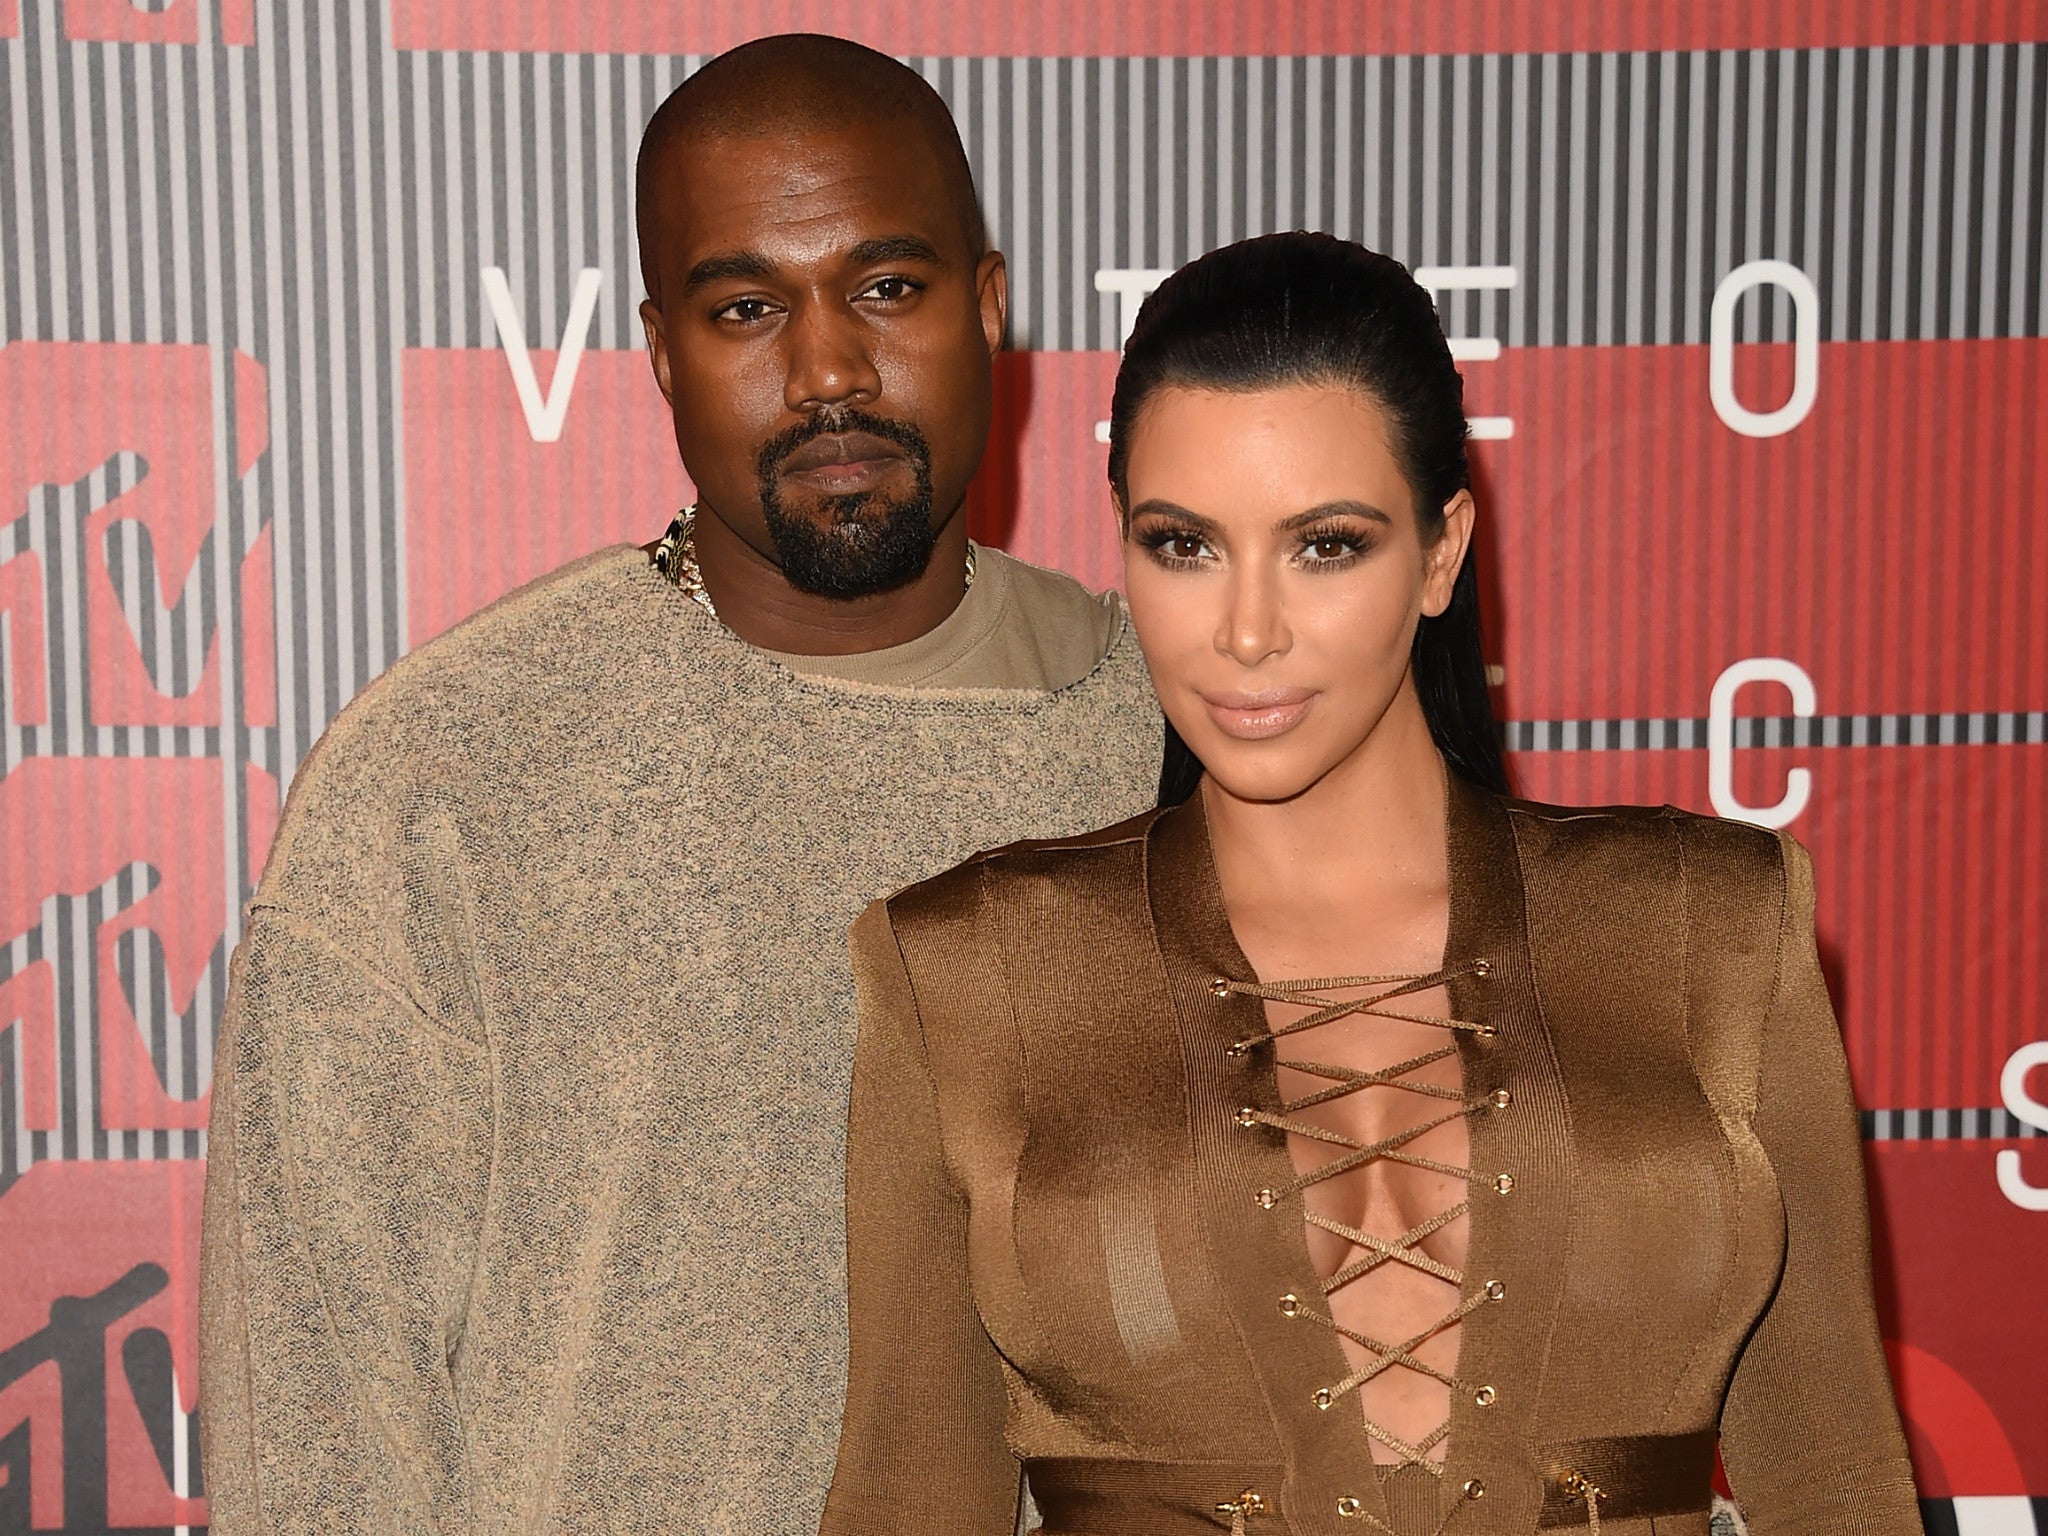 Kim is now happily married to rapper Kanye West